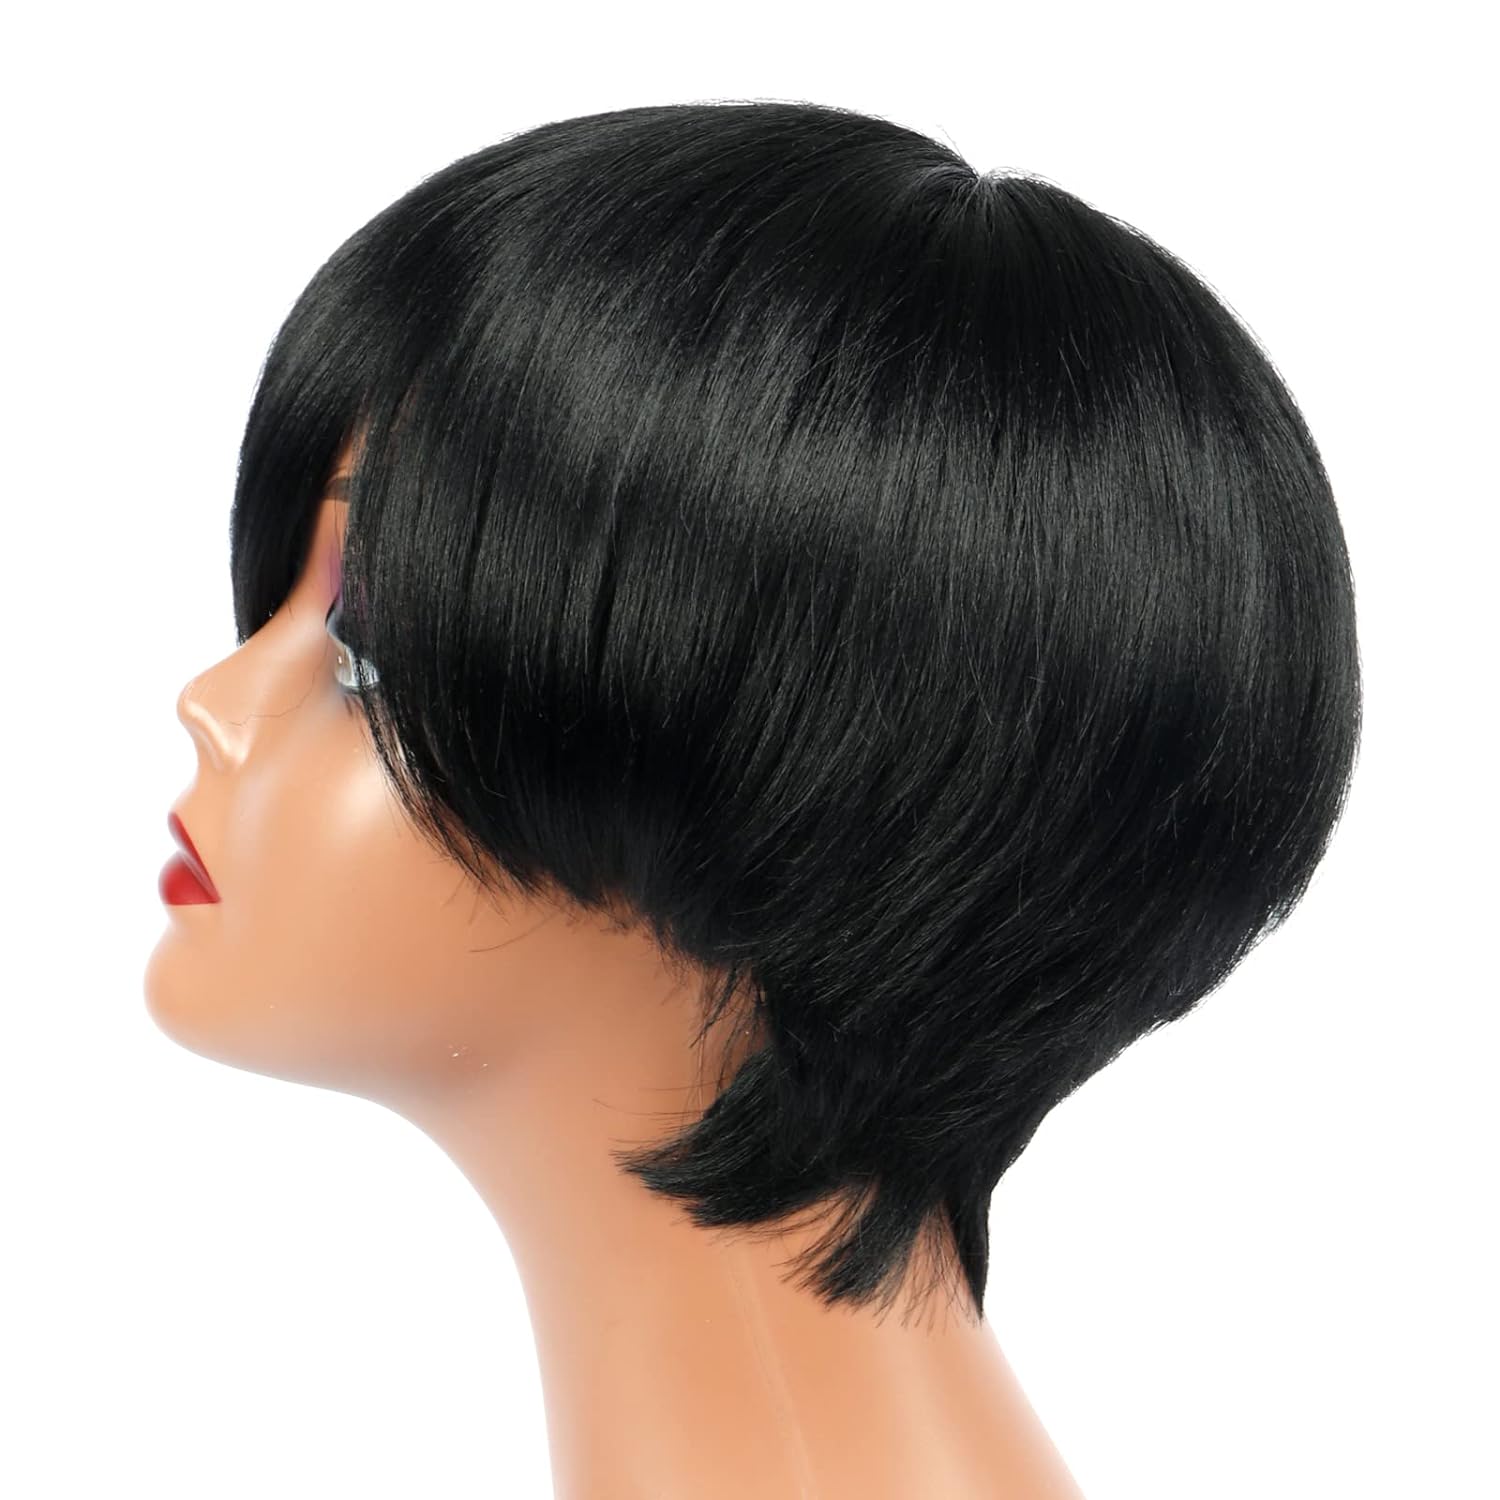 FAST SHIPPING 3-5 DAY SHORT WIG | ToyoTress Short Pixie Wigs With Side Bangs - Jet Black Yaki Straight Hair Daily Costume Wig For Black Women, Soft Light Synthetic Hair Replacement Wigs Heat Resistant